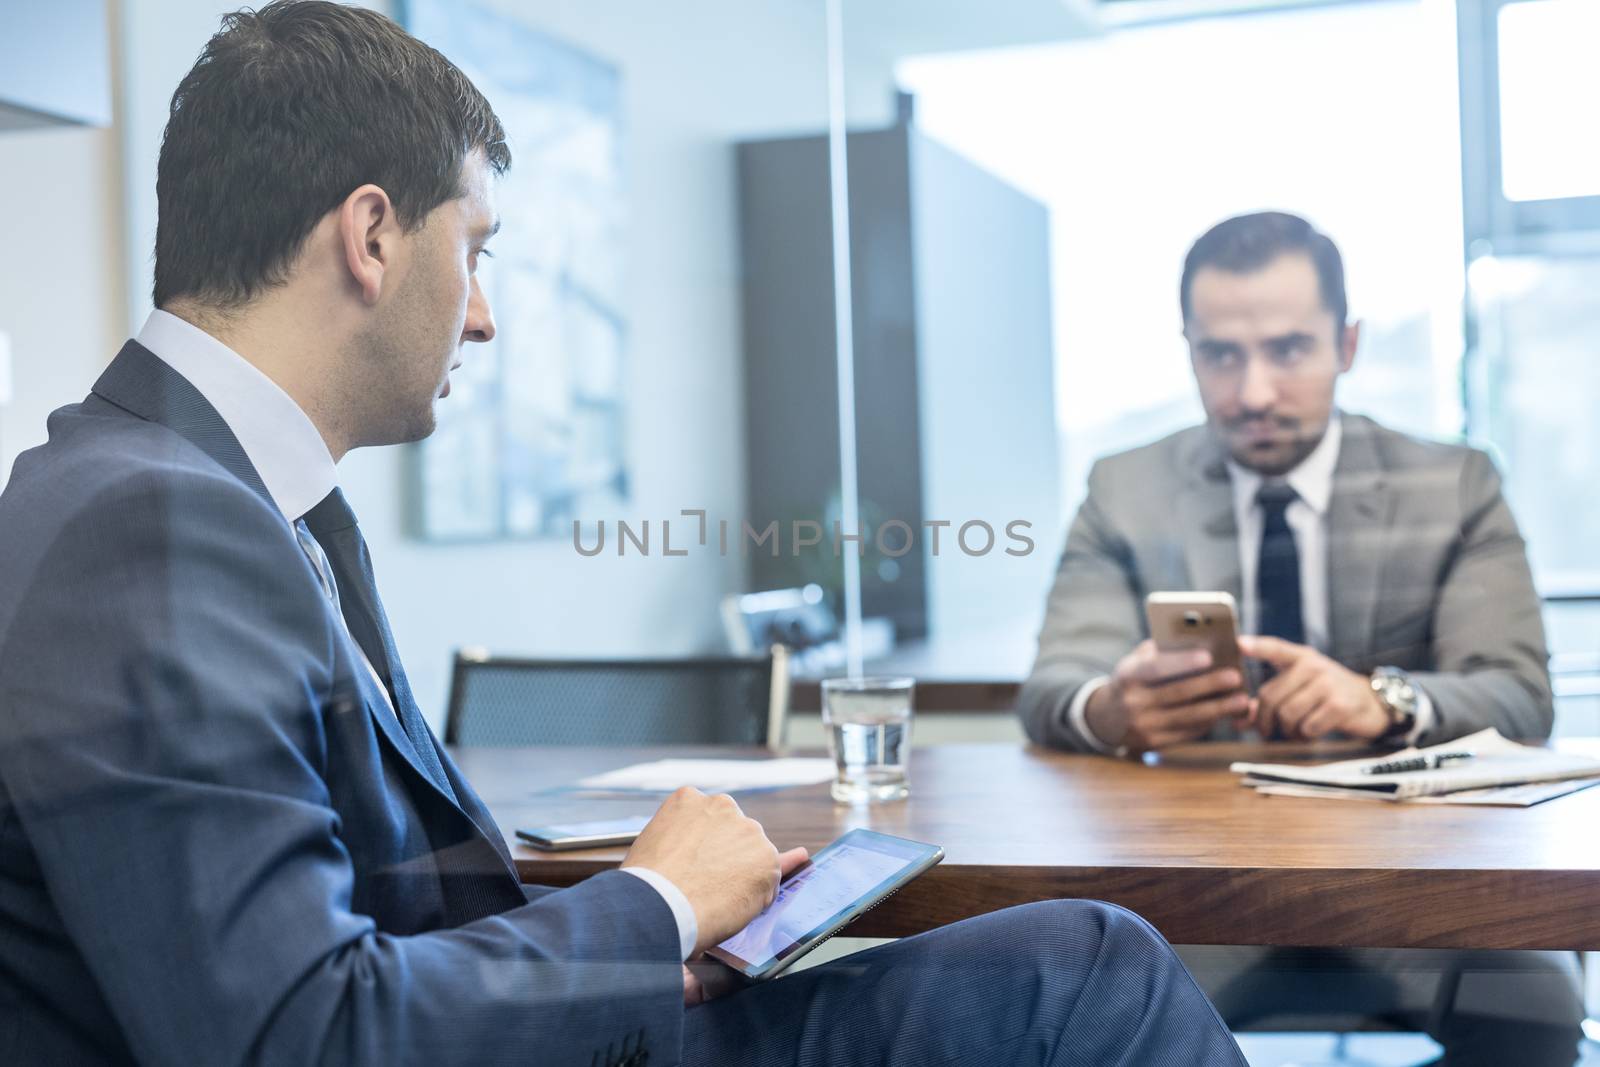 Through the window view of two young businessmen using tablet and smart phone devices at working business meeting in corporative office.